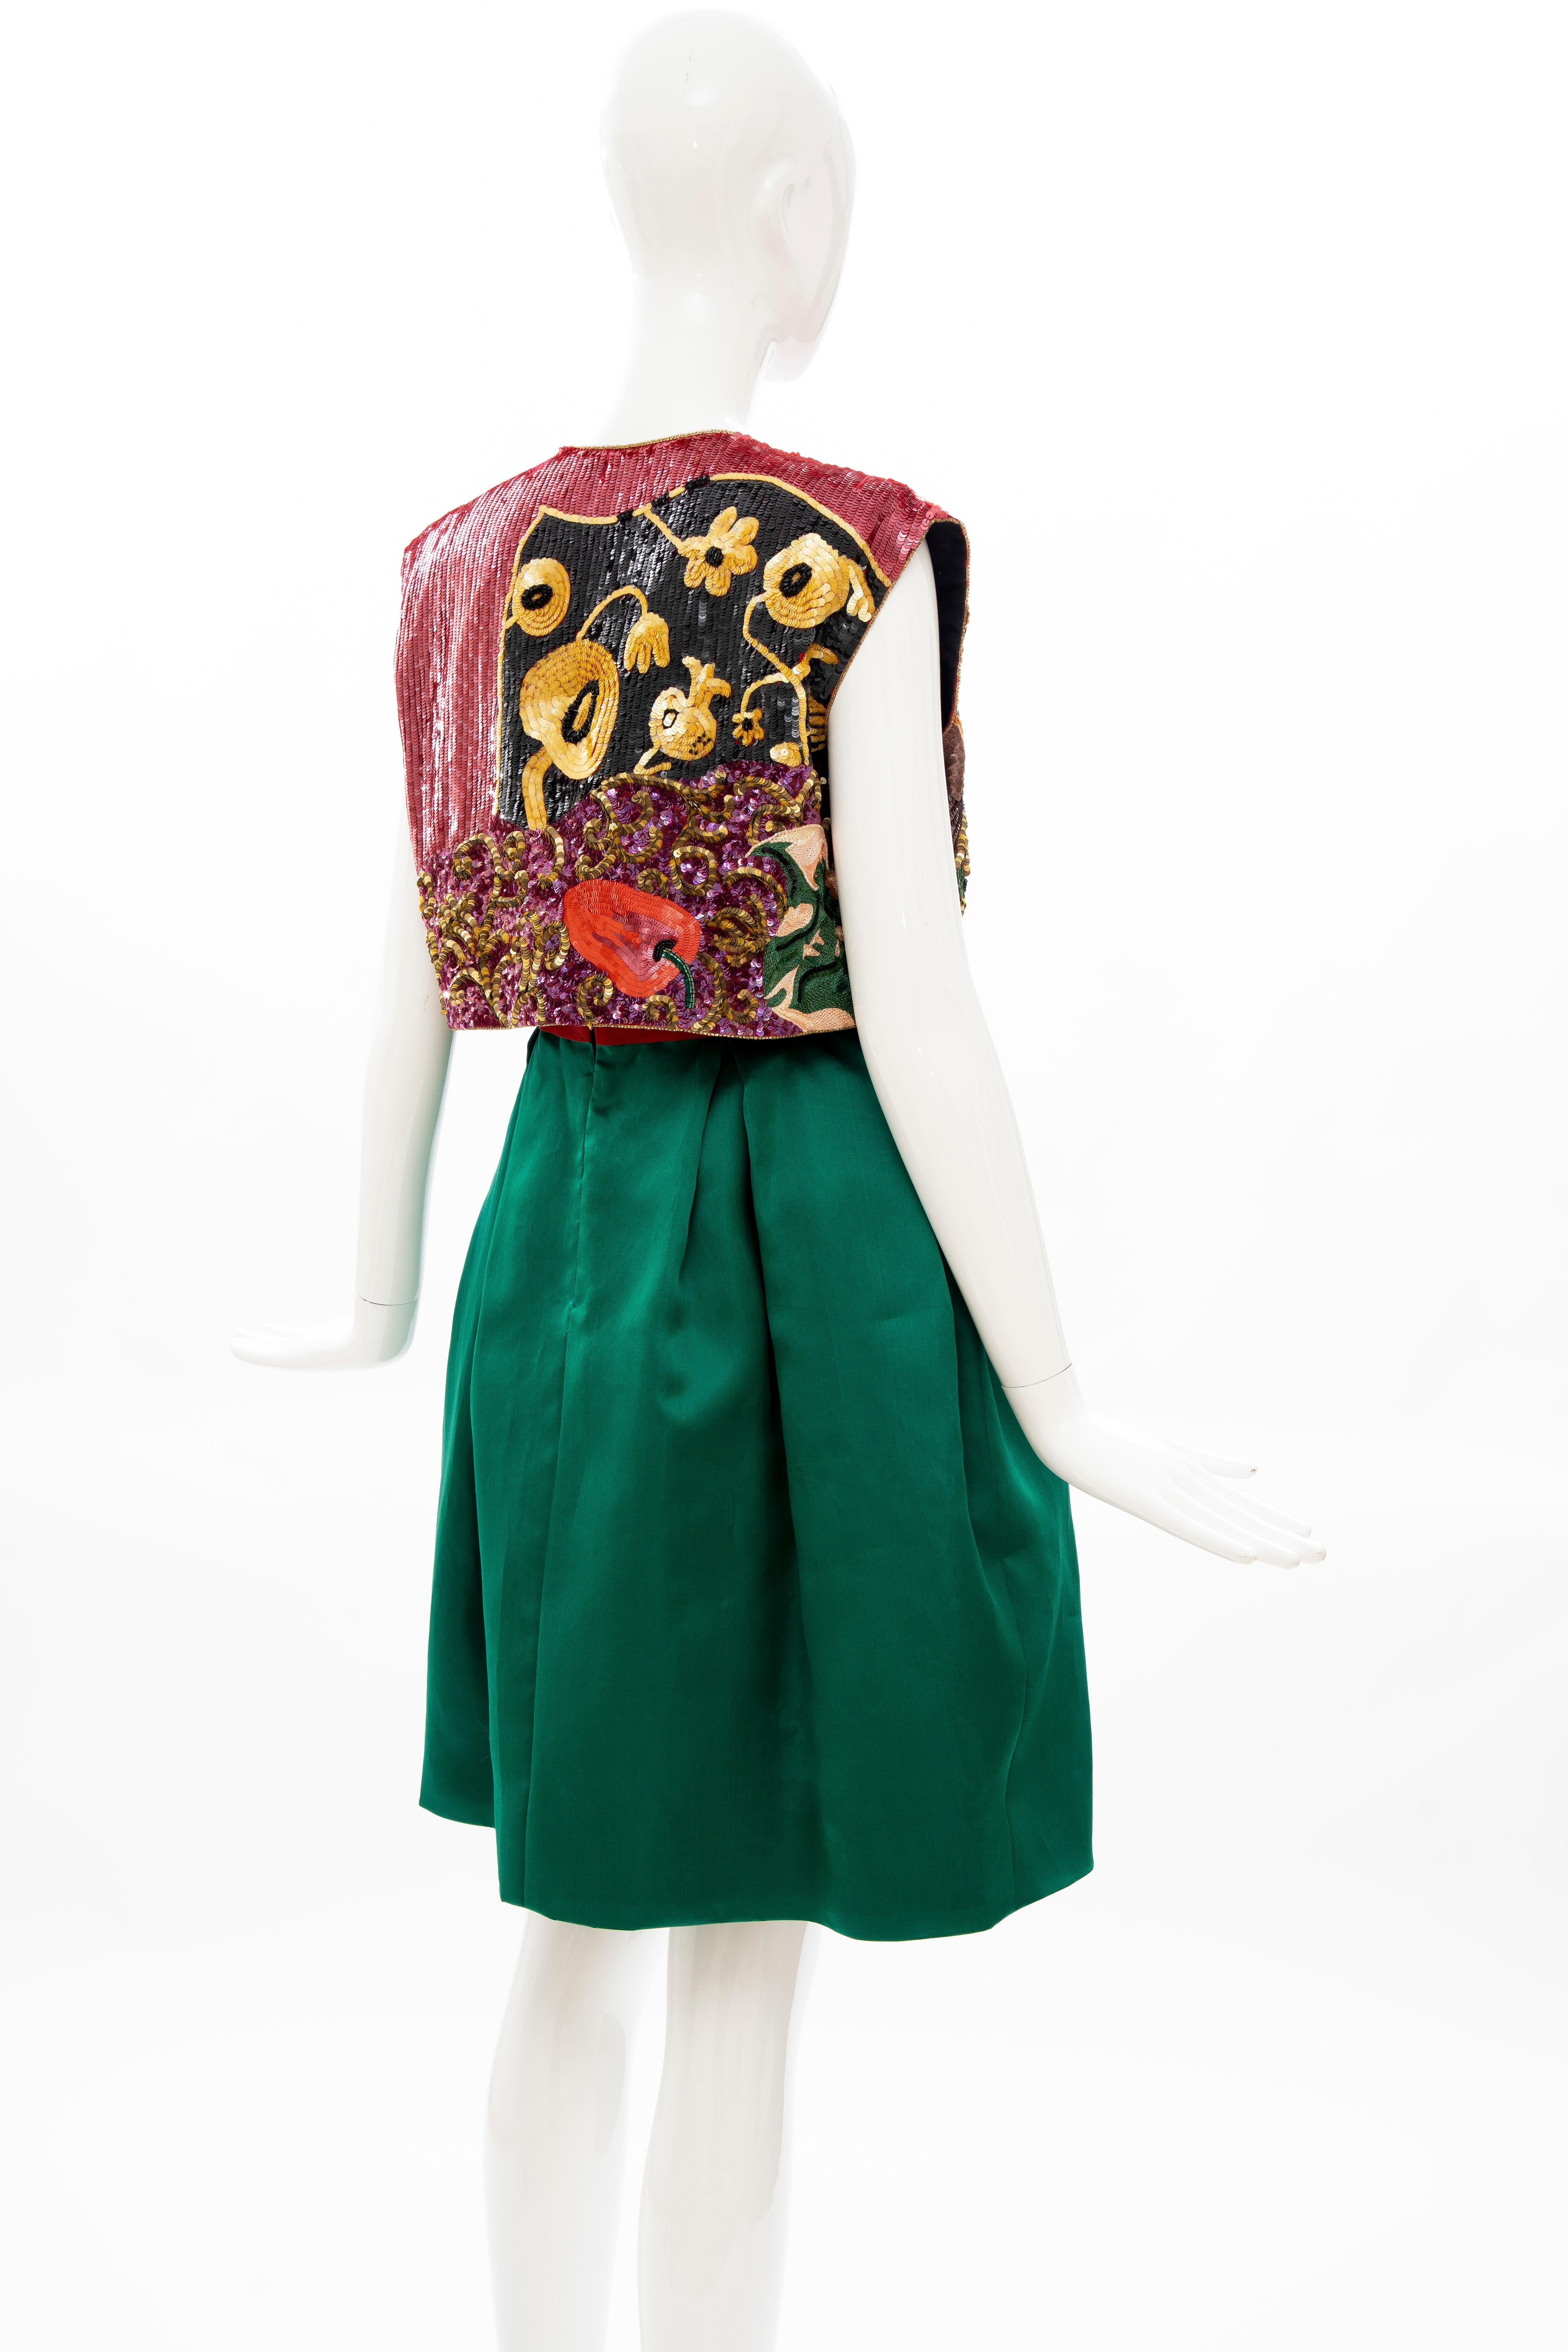 Bill Blass Matisse Inspired Embroidered Sequined Dress Ensemble, Spring 1988 For Sale 3